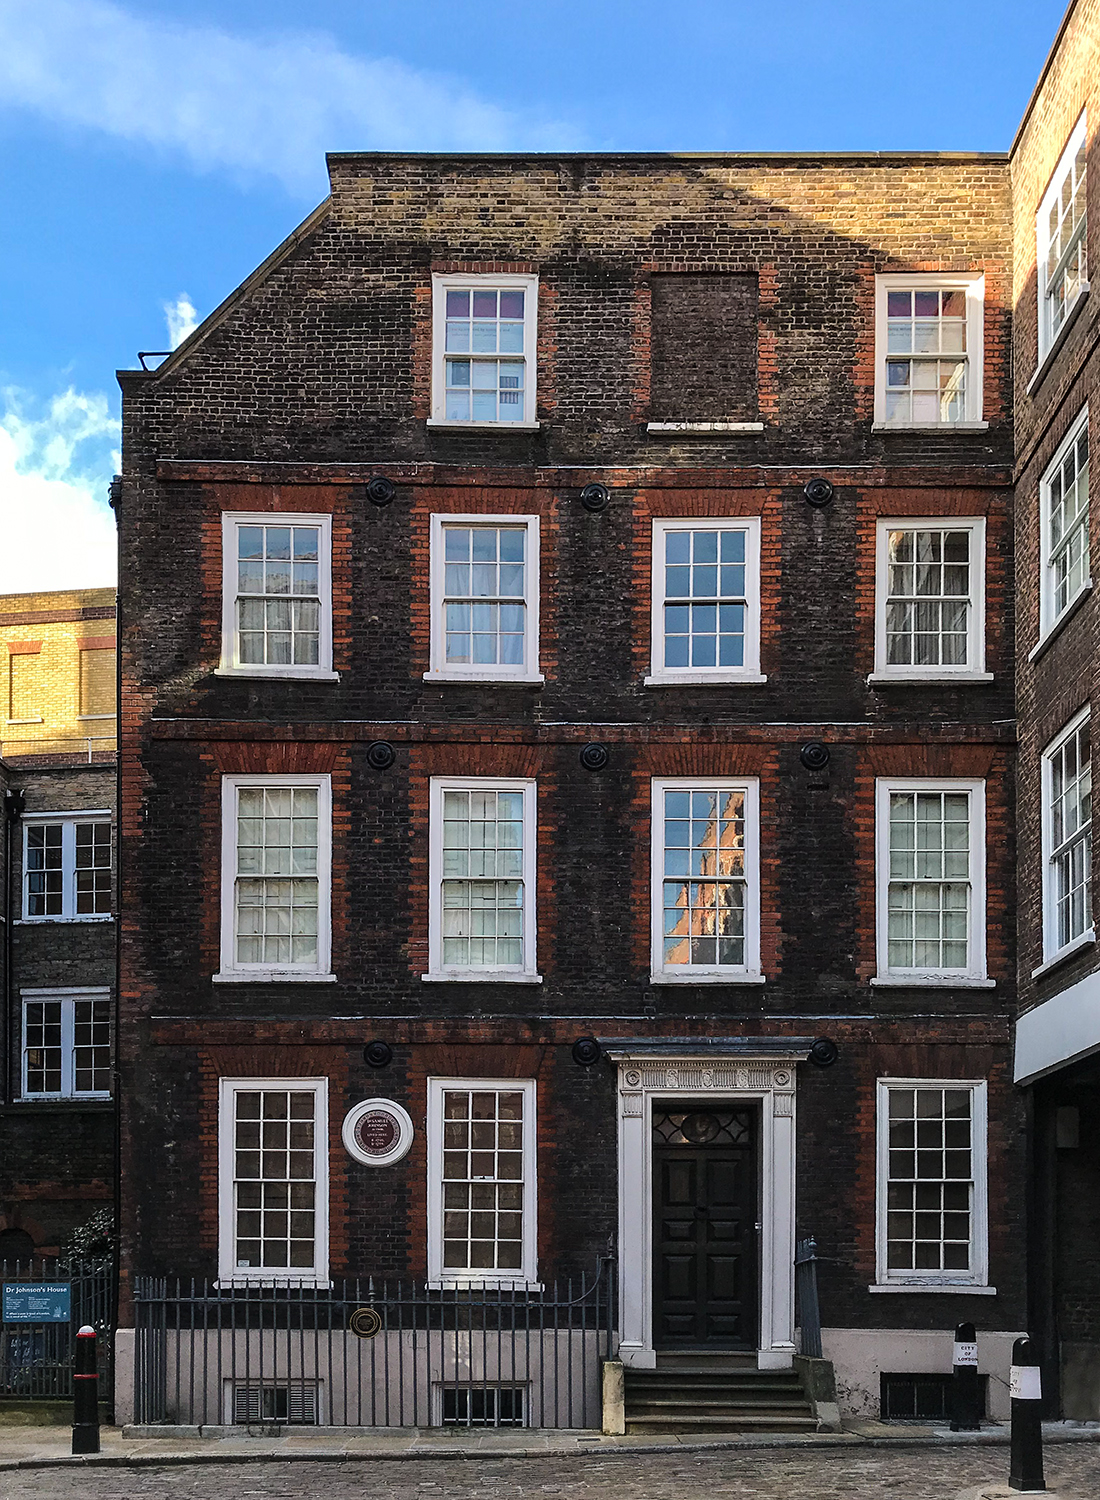 Exploring Dr Johnson's House - Printed Pearls